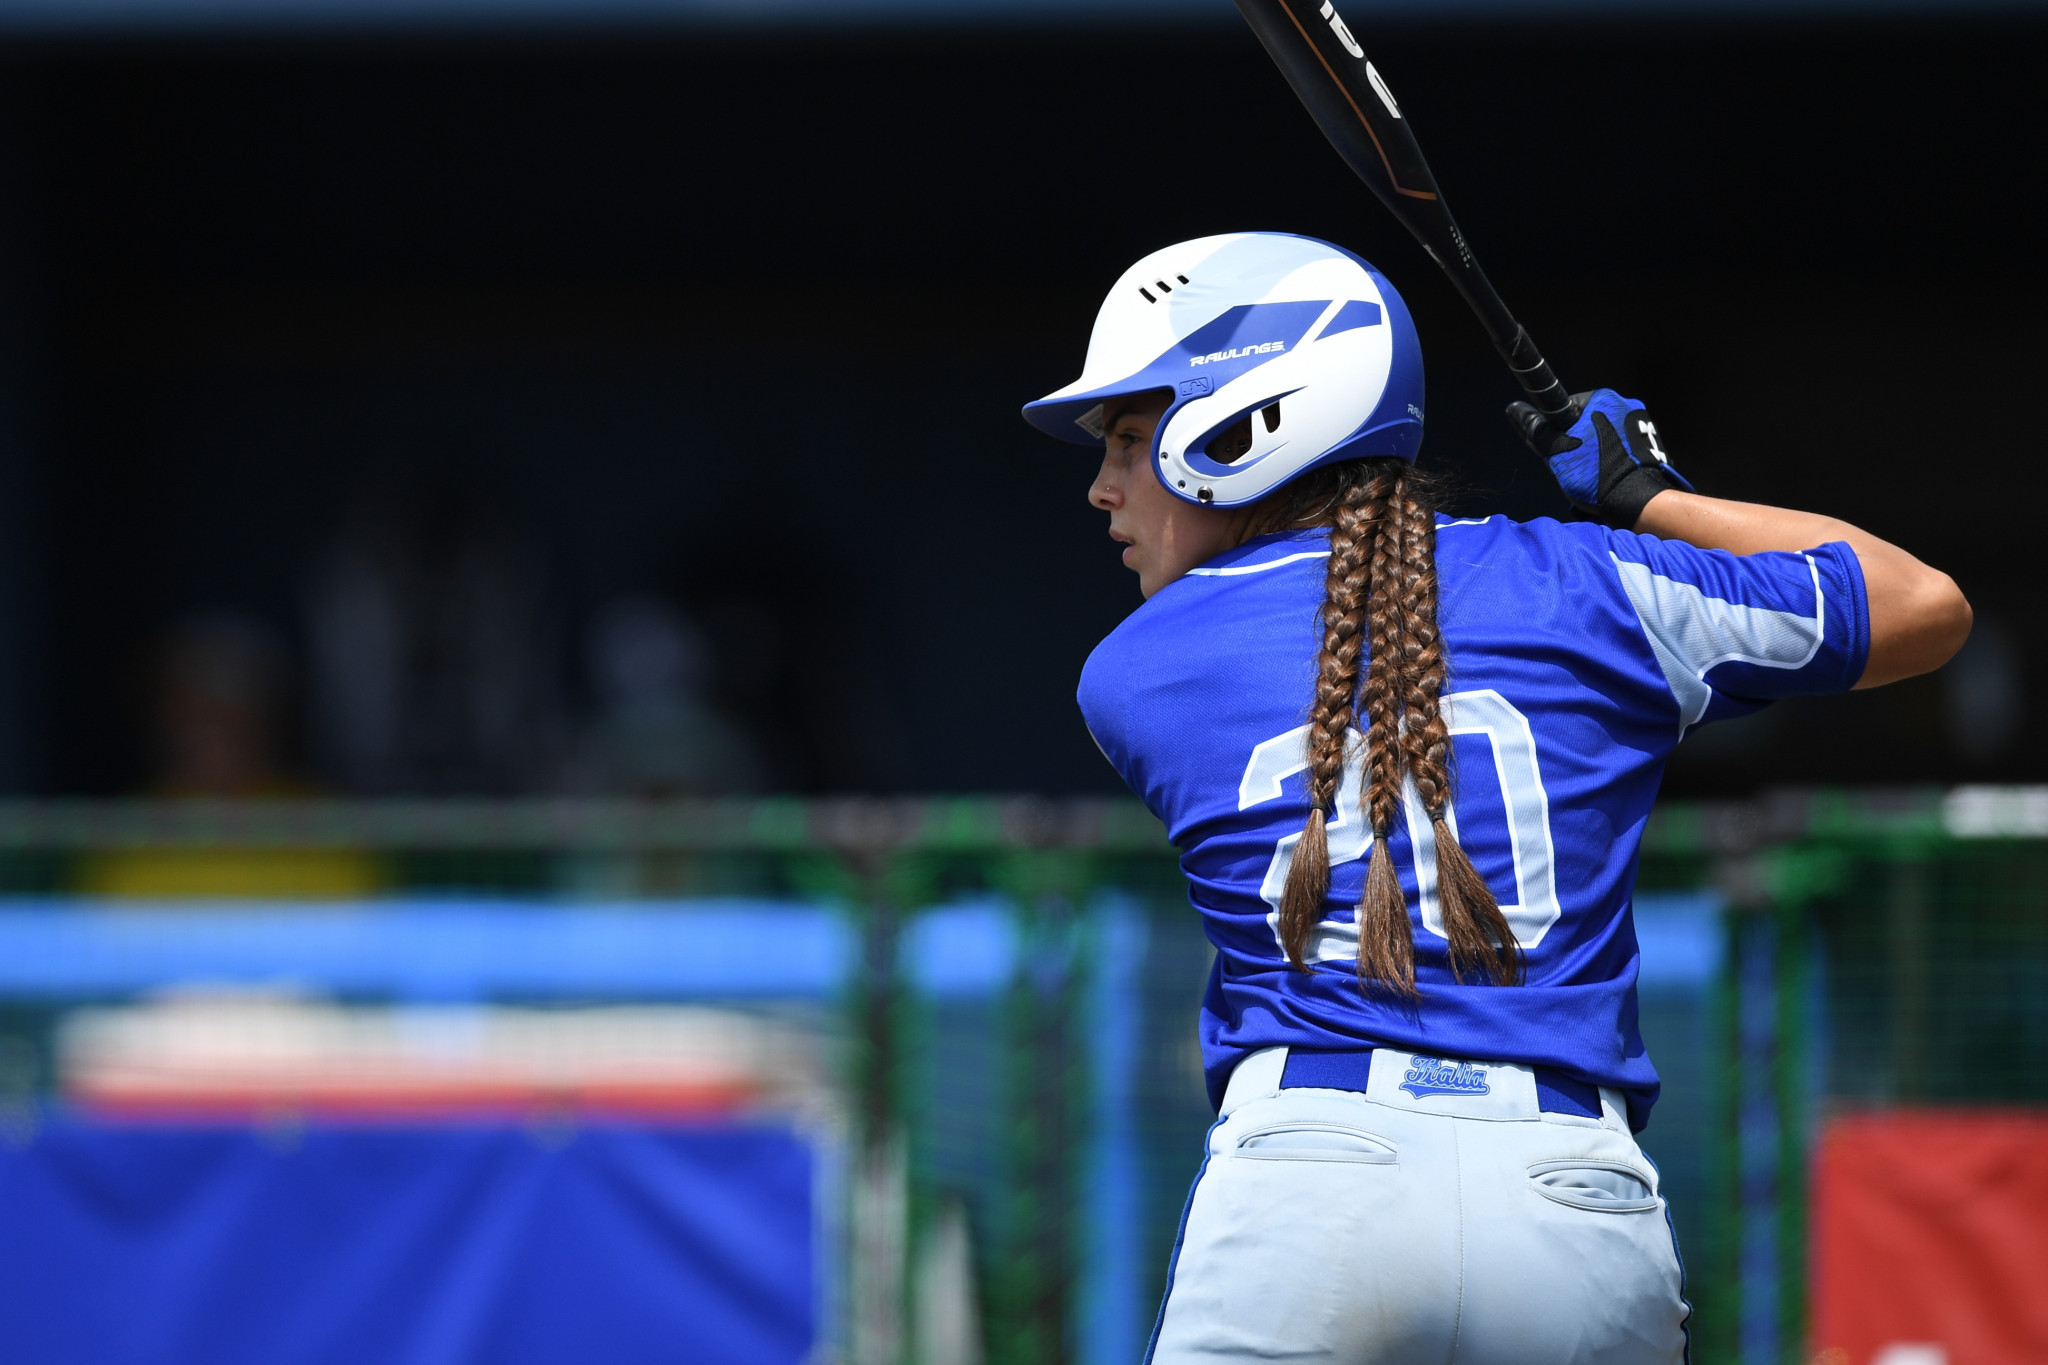 Italy’s softball team to step up Tokyo 2020 preparations with training camp